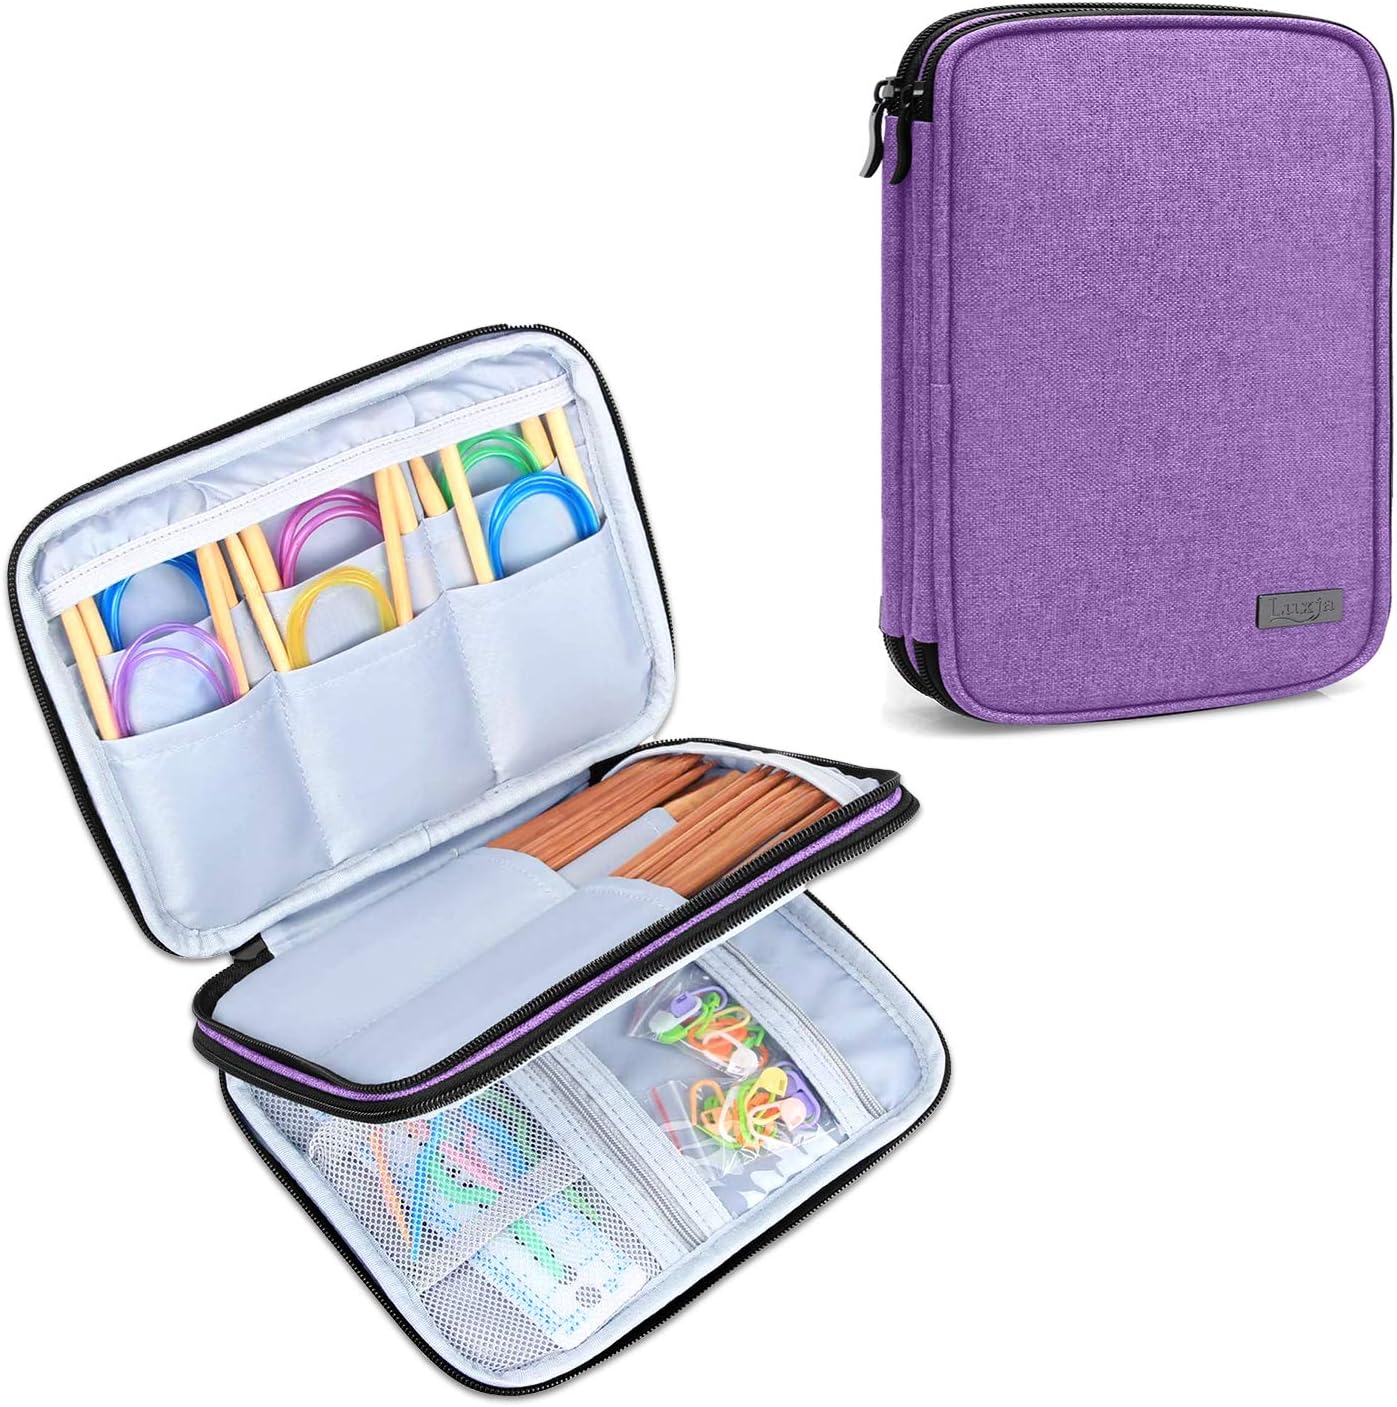 LUXJA Knitting Needles Case(up to 8 Inches), Travel Organizer Storage Bag for Circular Needles, 8 Inches Knitting Needles and Other Accessories(NO ACCESSORIES INCLUDED), Purple